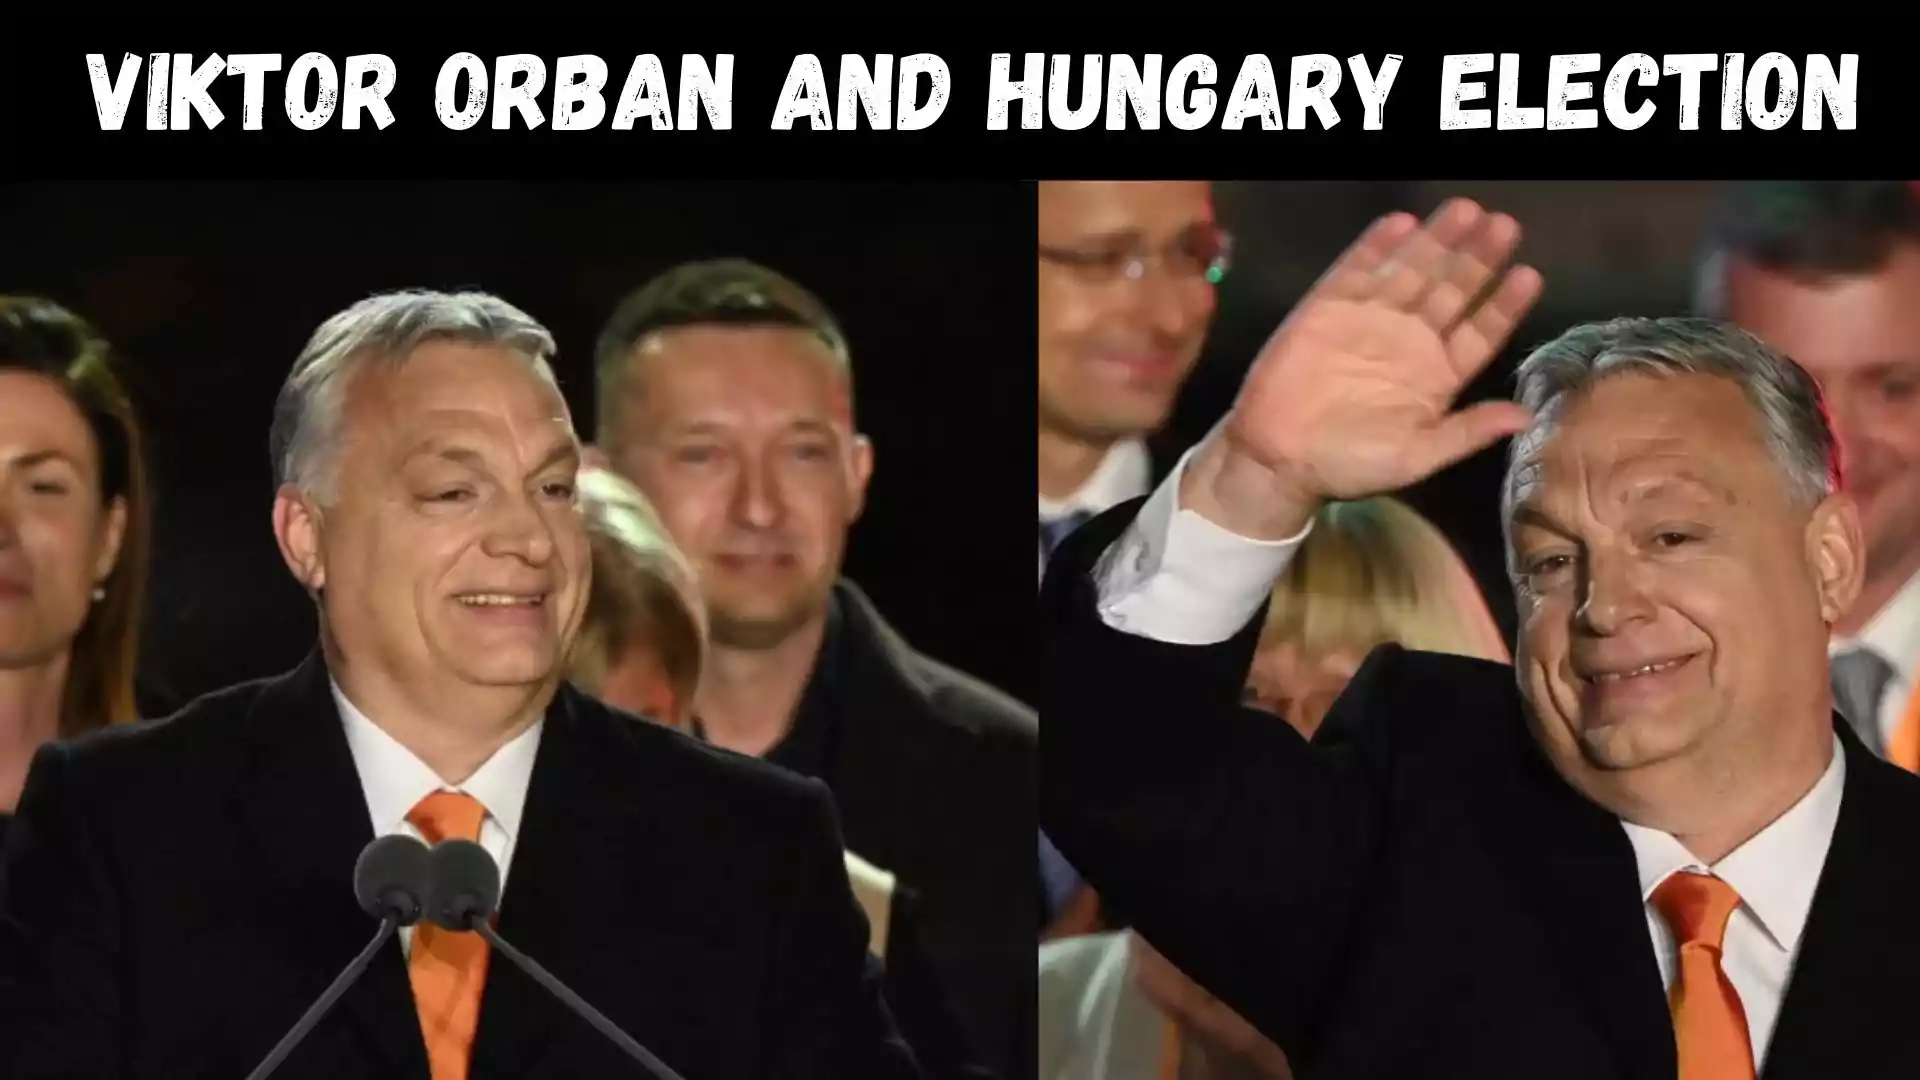 Viktor Orban and Hungary Election Wallpaper and images